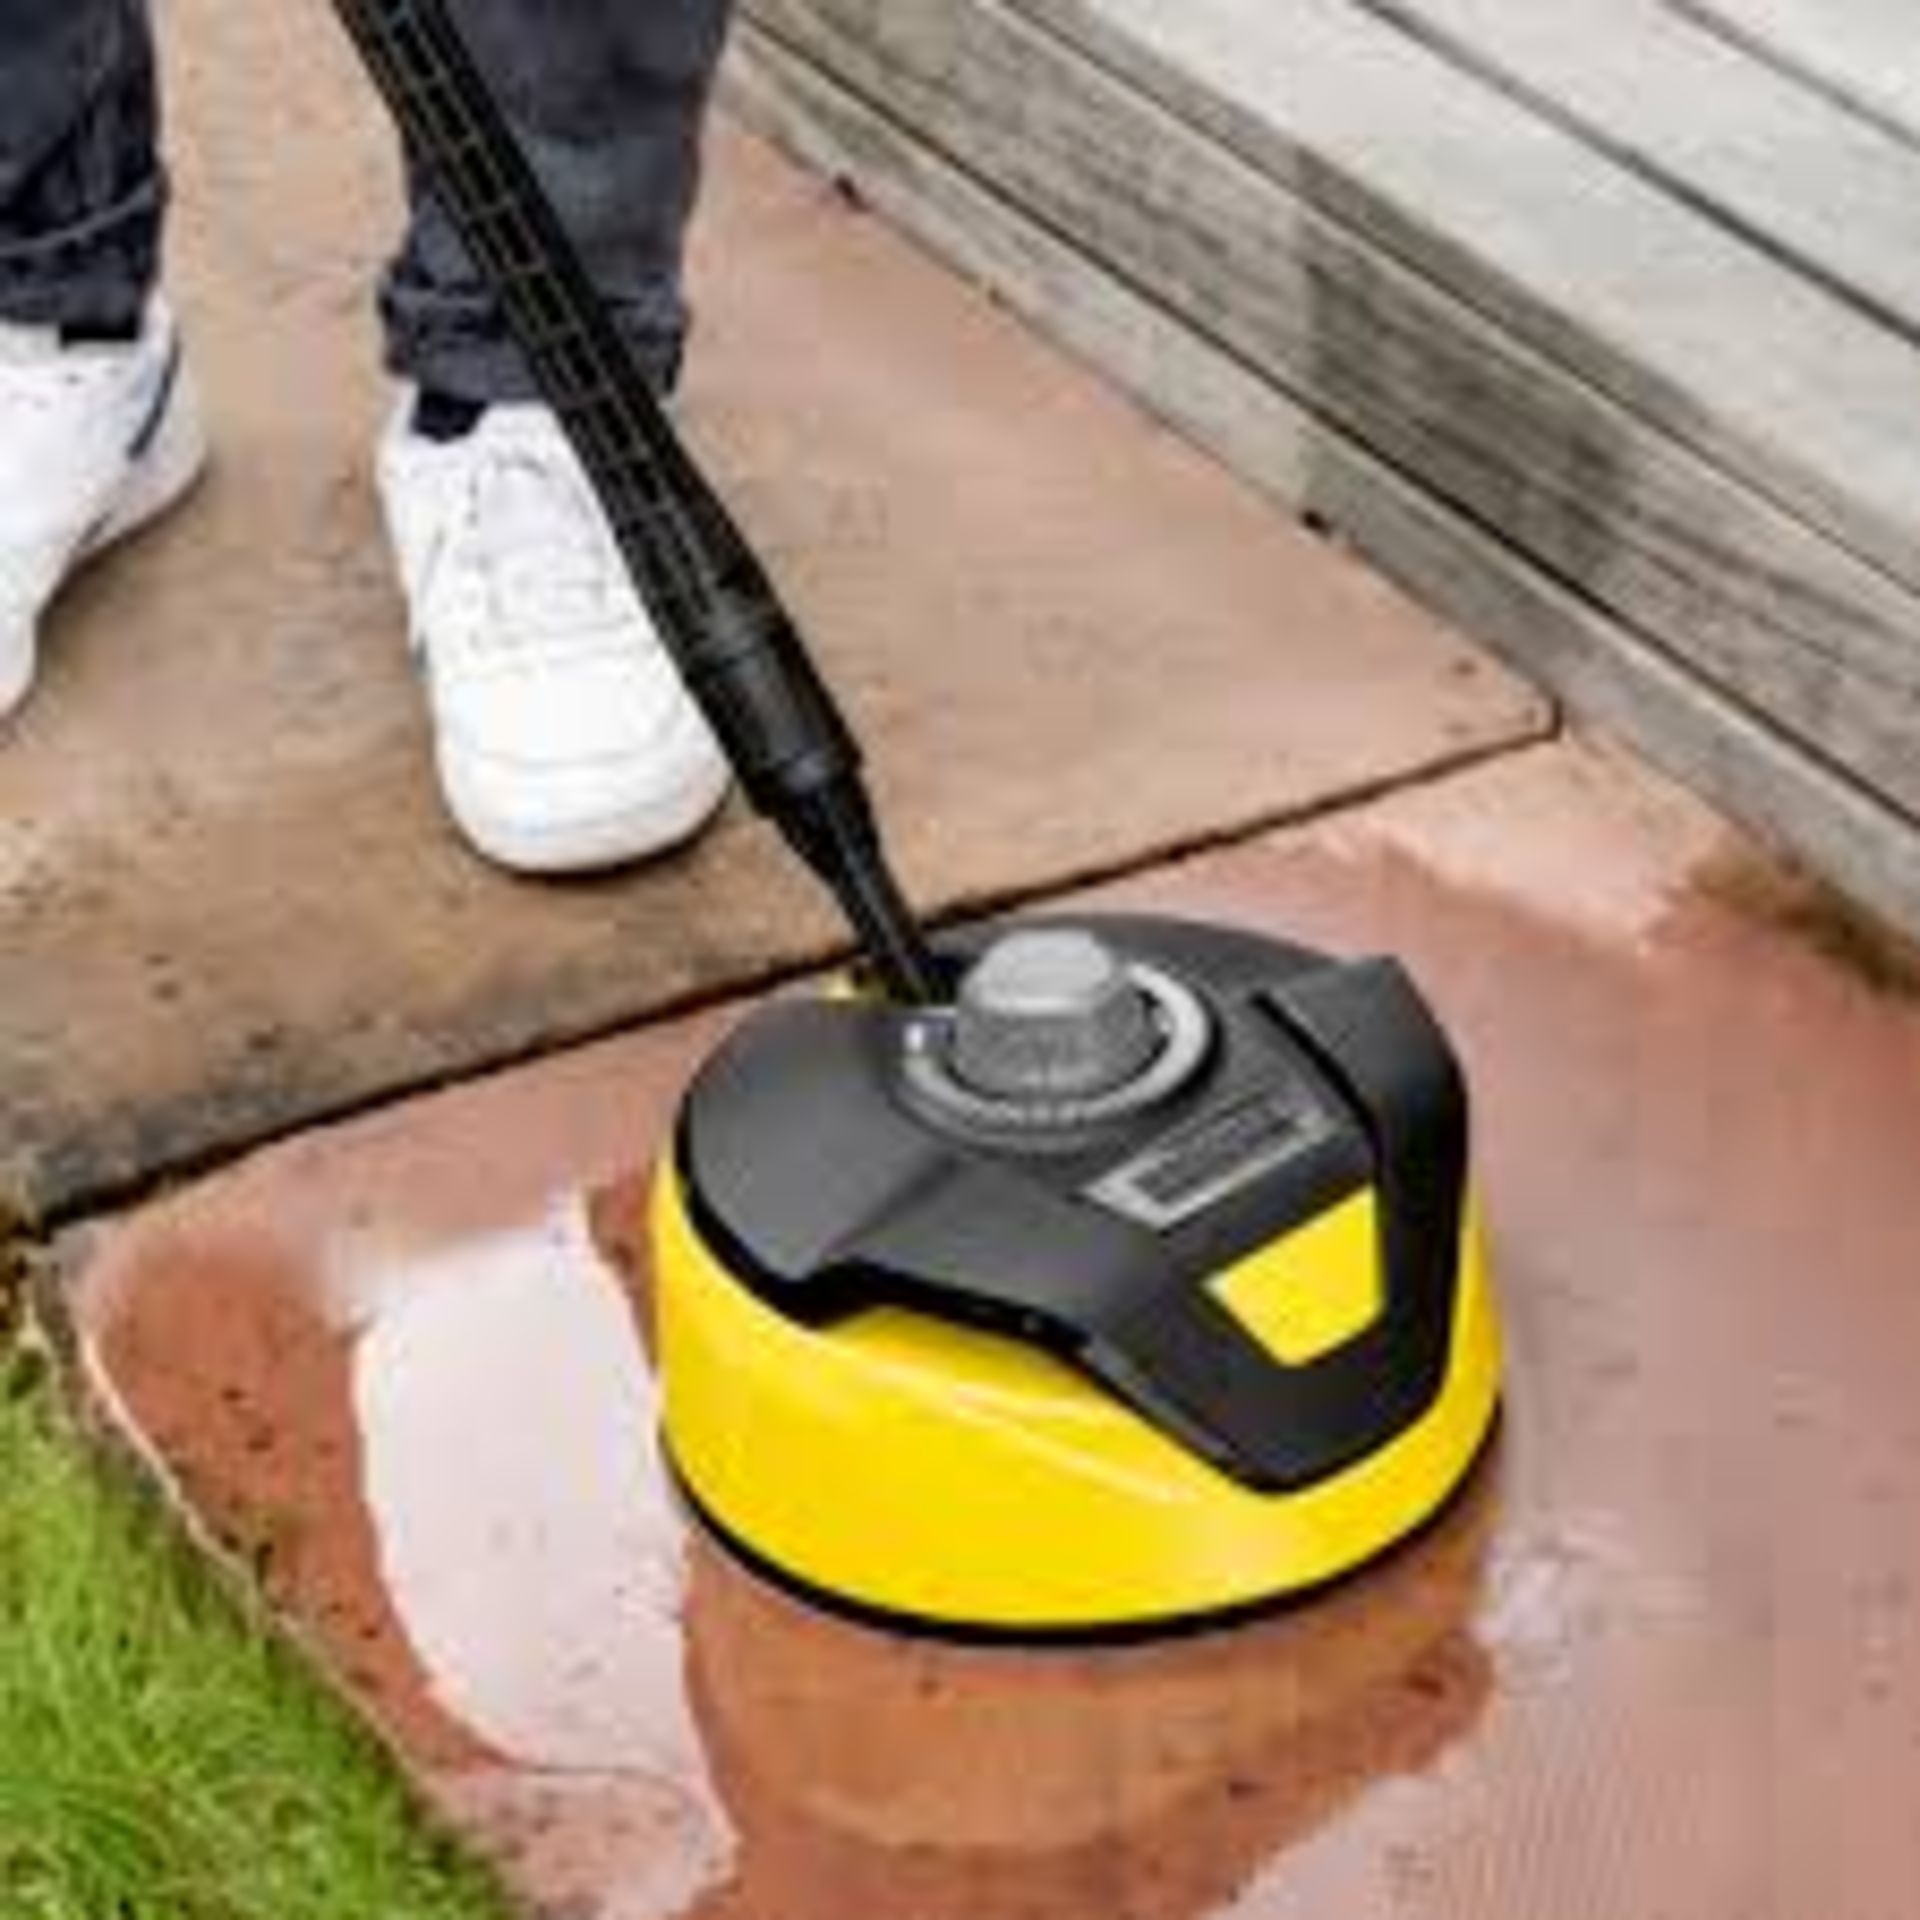 Kärcher T 5 T-Racer surface cleaner Pressure washer patio & decking cleaner (Dia)28cm. - S2. The